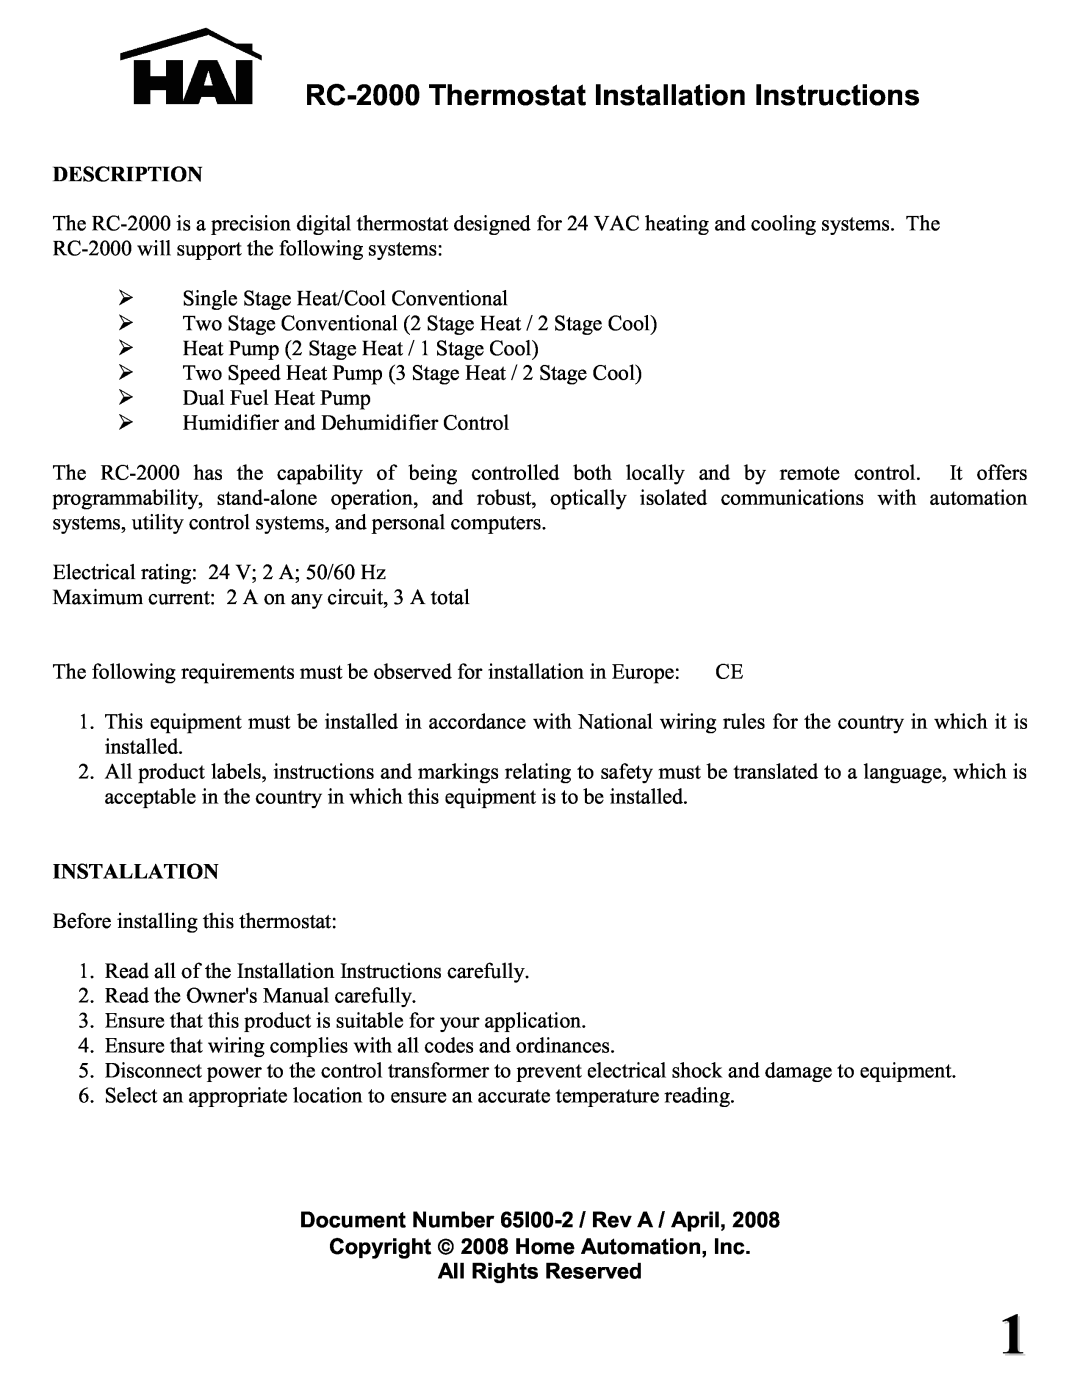 Home Automation RC-2000 installation instructions Document Number 65I00-2 /Rev A / April, All Rights Reserved, Description 